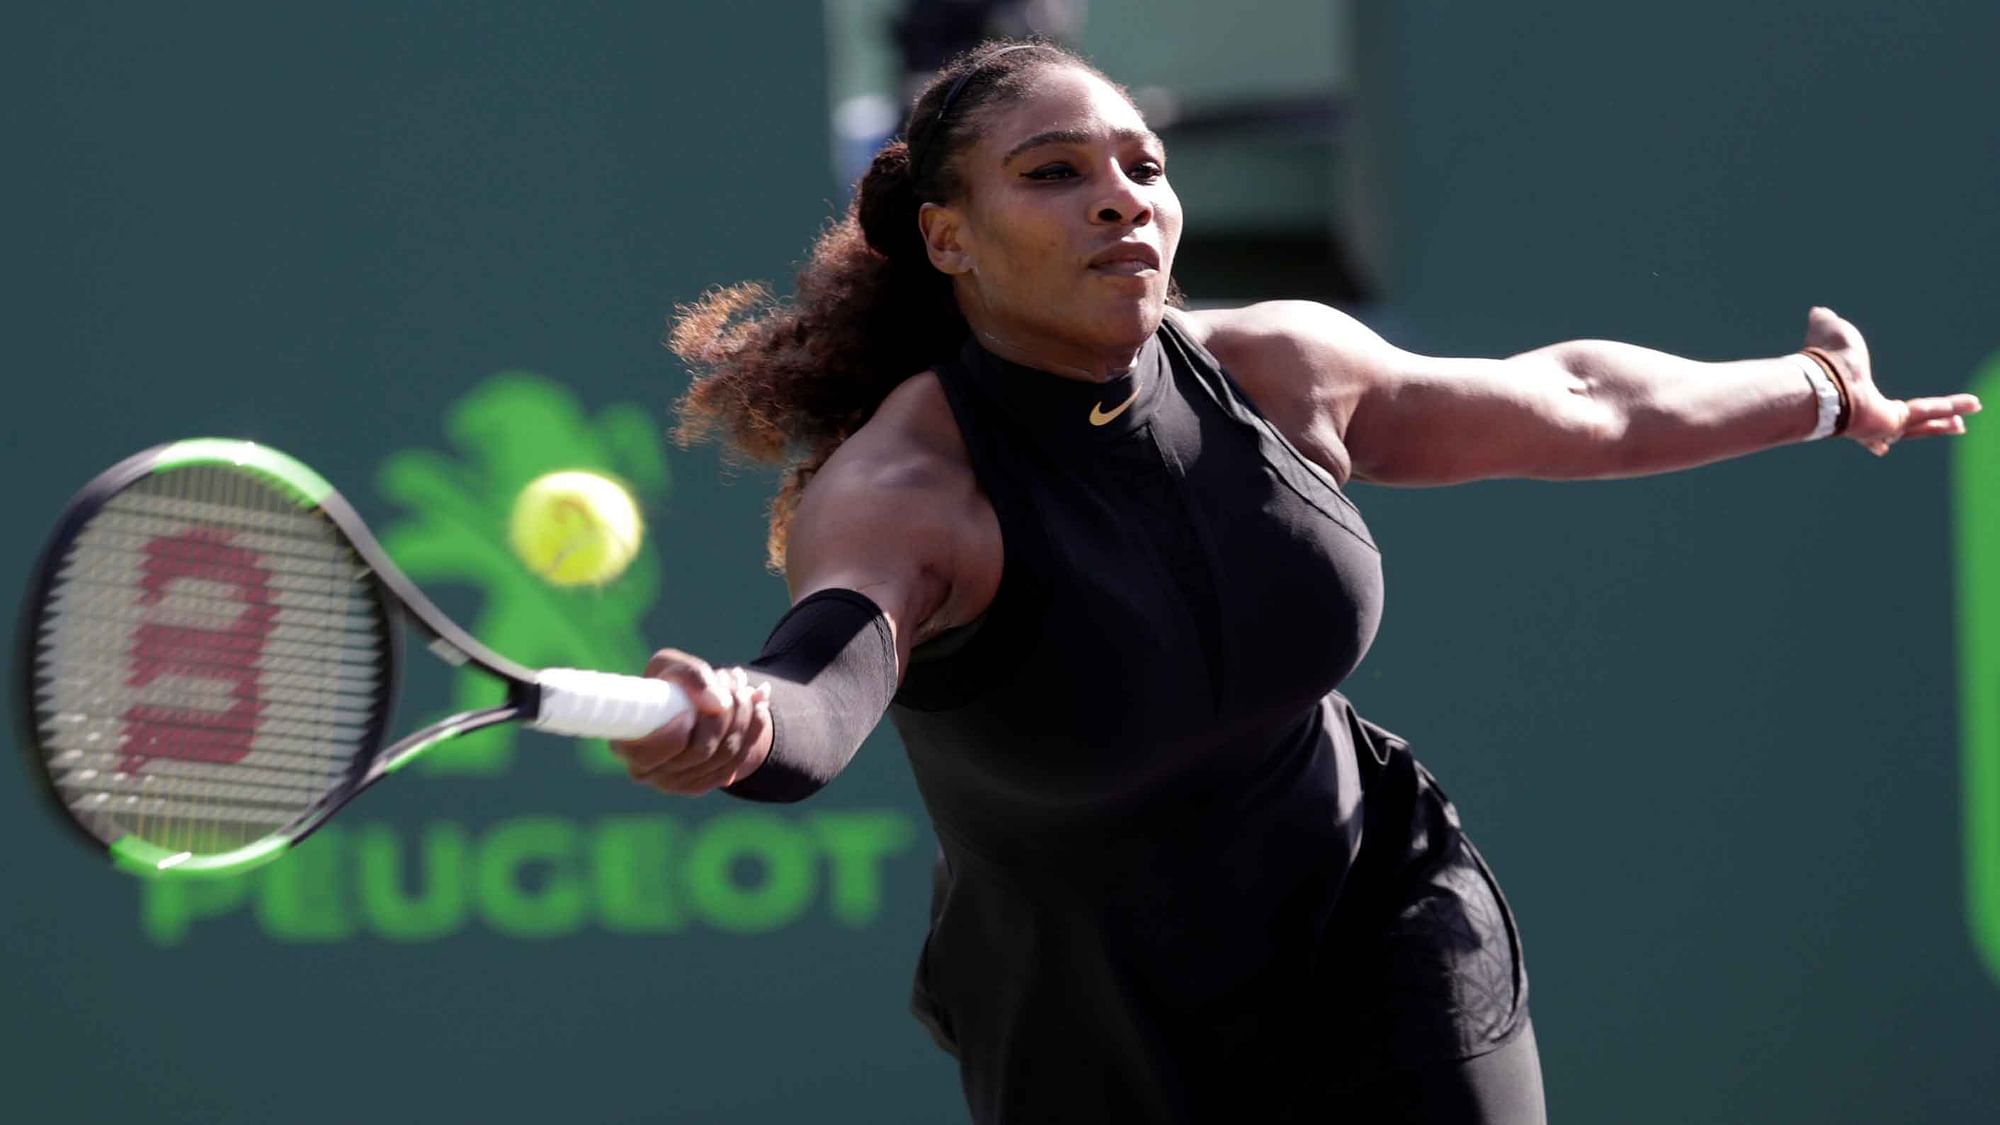 Serena Williams lost to Naomi Osaka in the first round of Miami Open.